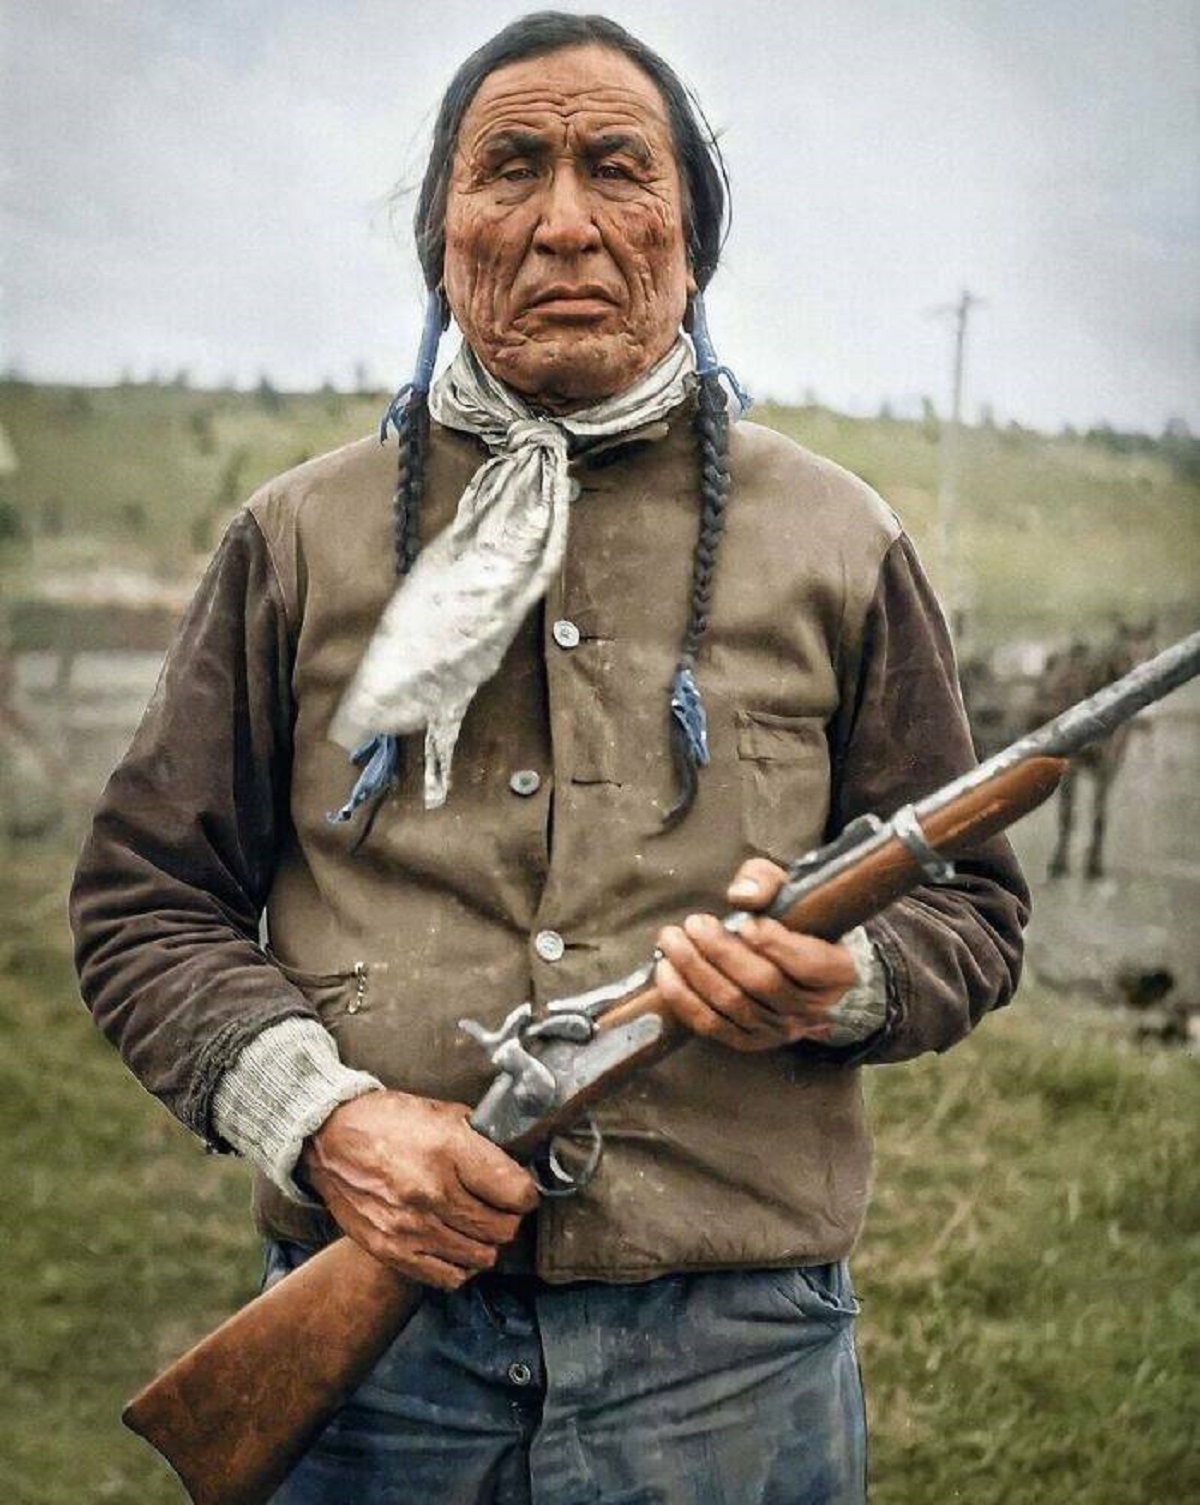 "Wooden Leg, A Northern Cheyenne Warrior, Photographed In 1927"

"He was notable for fighting against US Army officer and cavalry commander George Armstrong Custer at the Battle of the Little Big Horn."